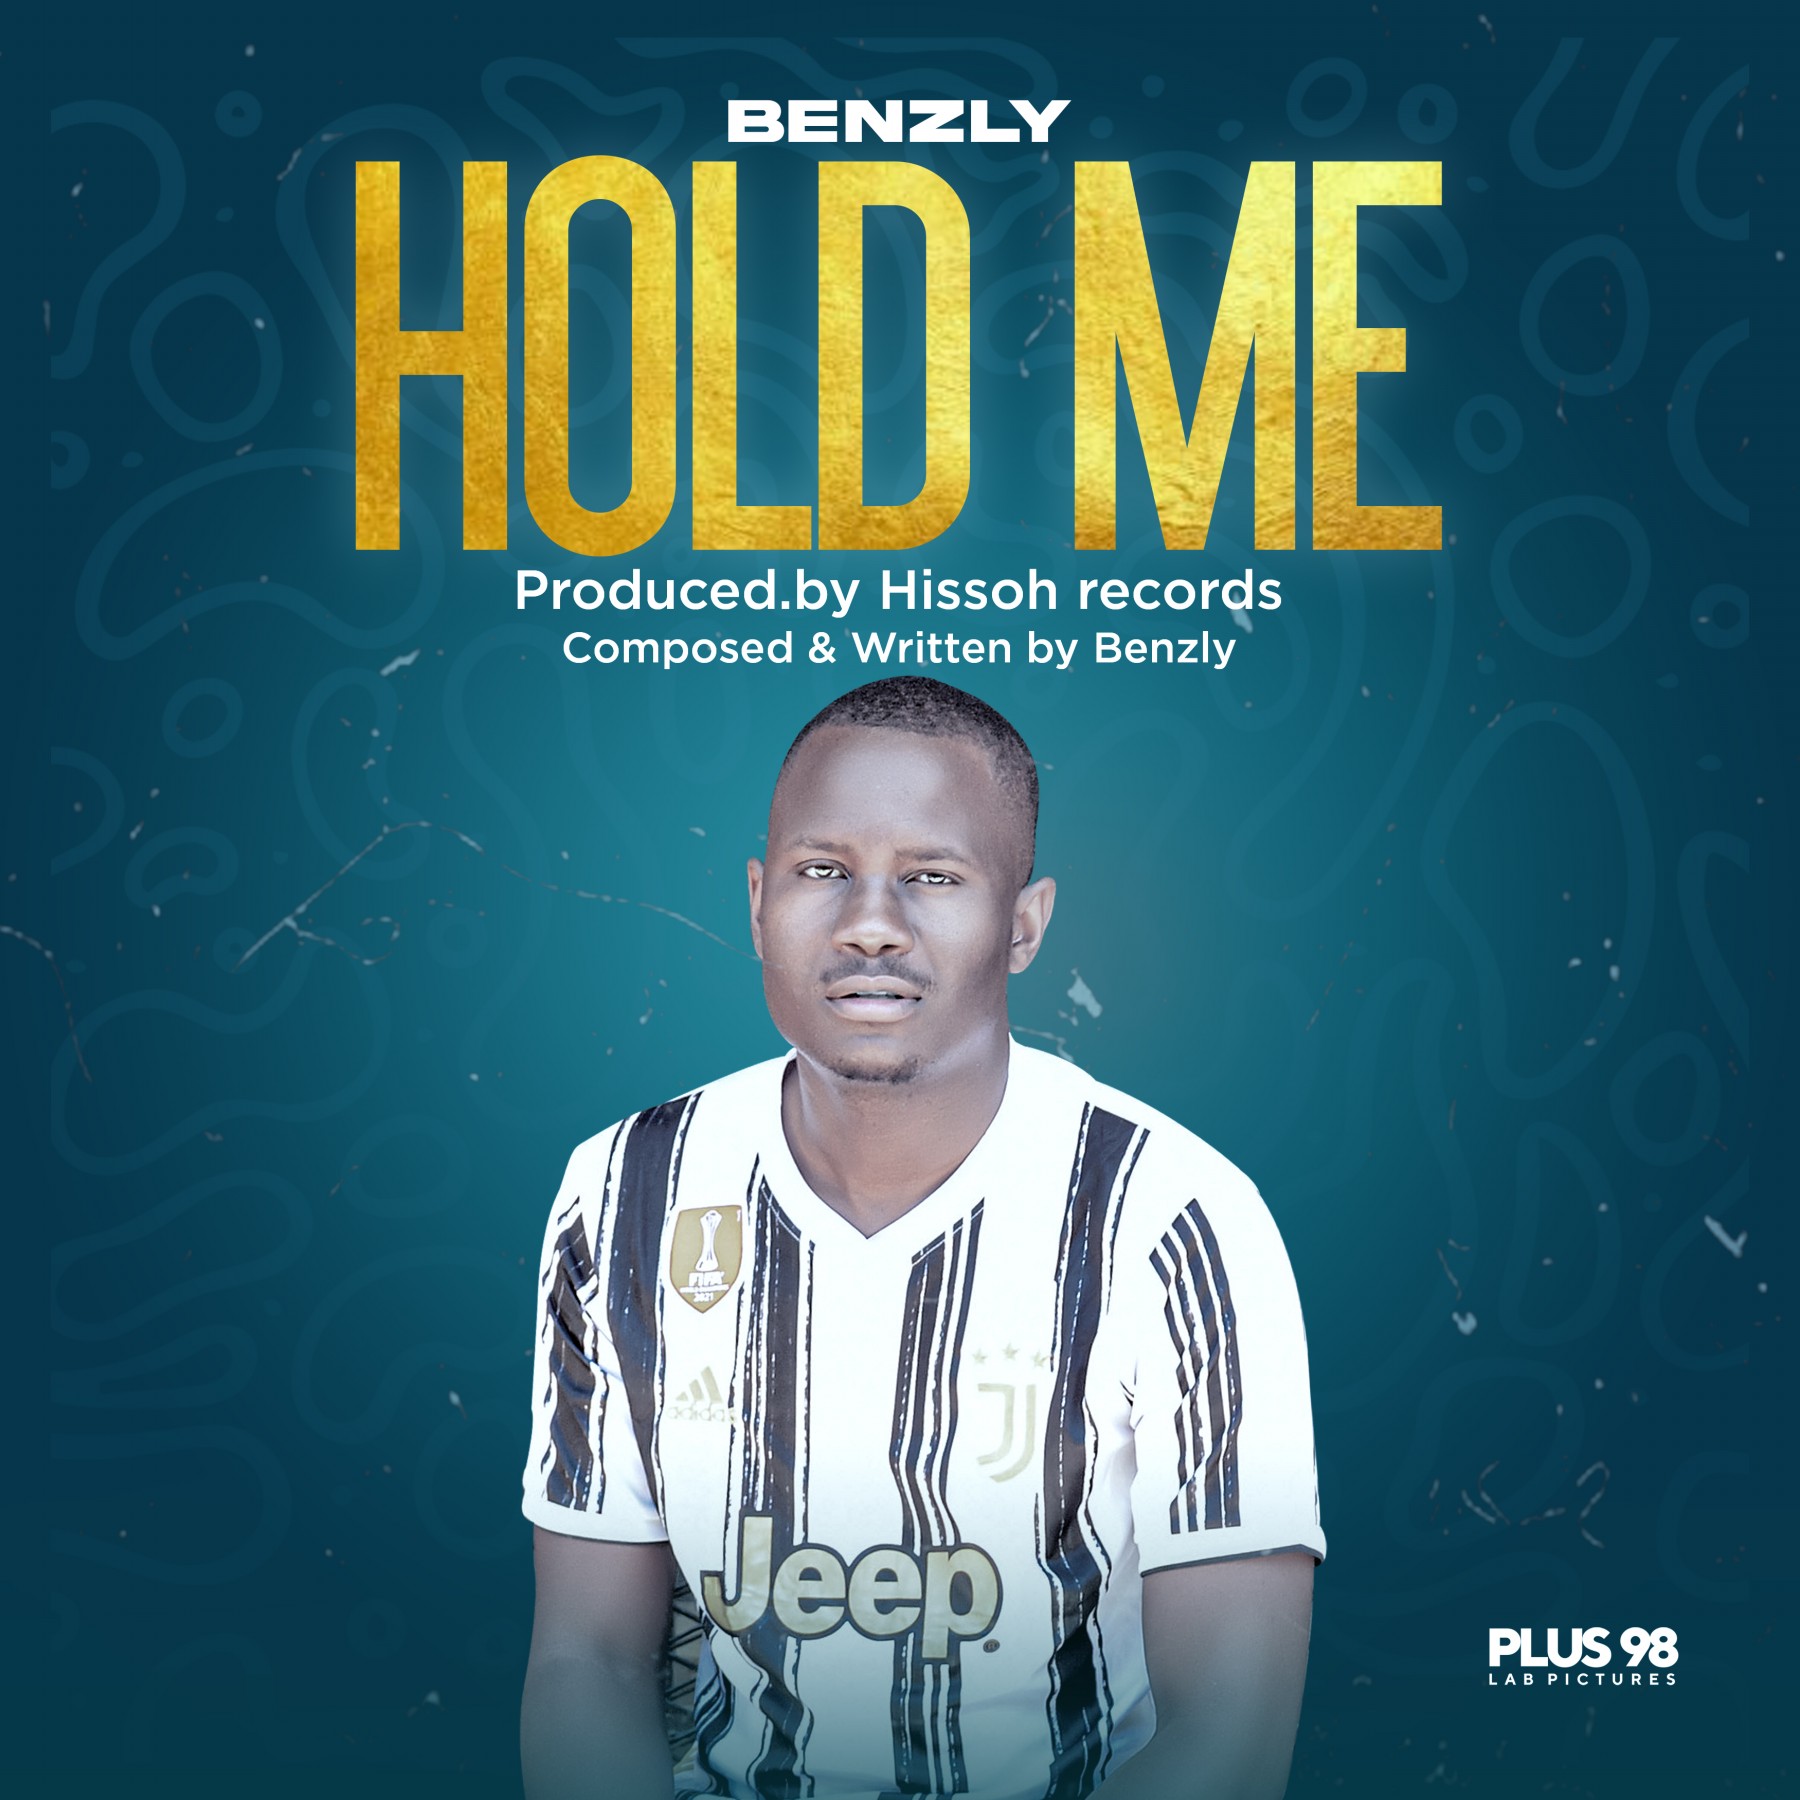 Benzly-Hold-me-prod-by-hissoh-records